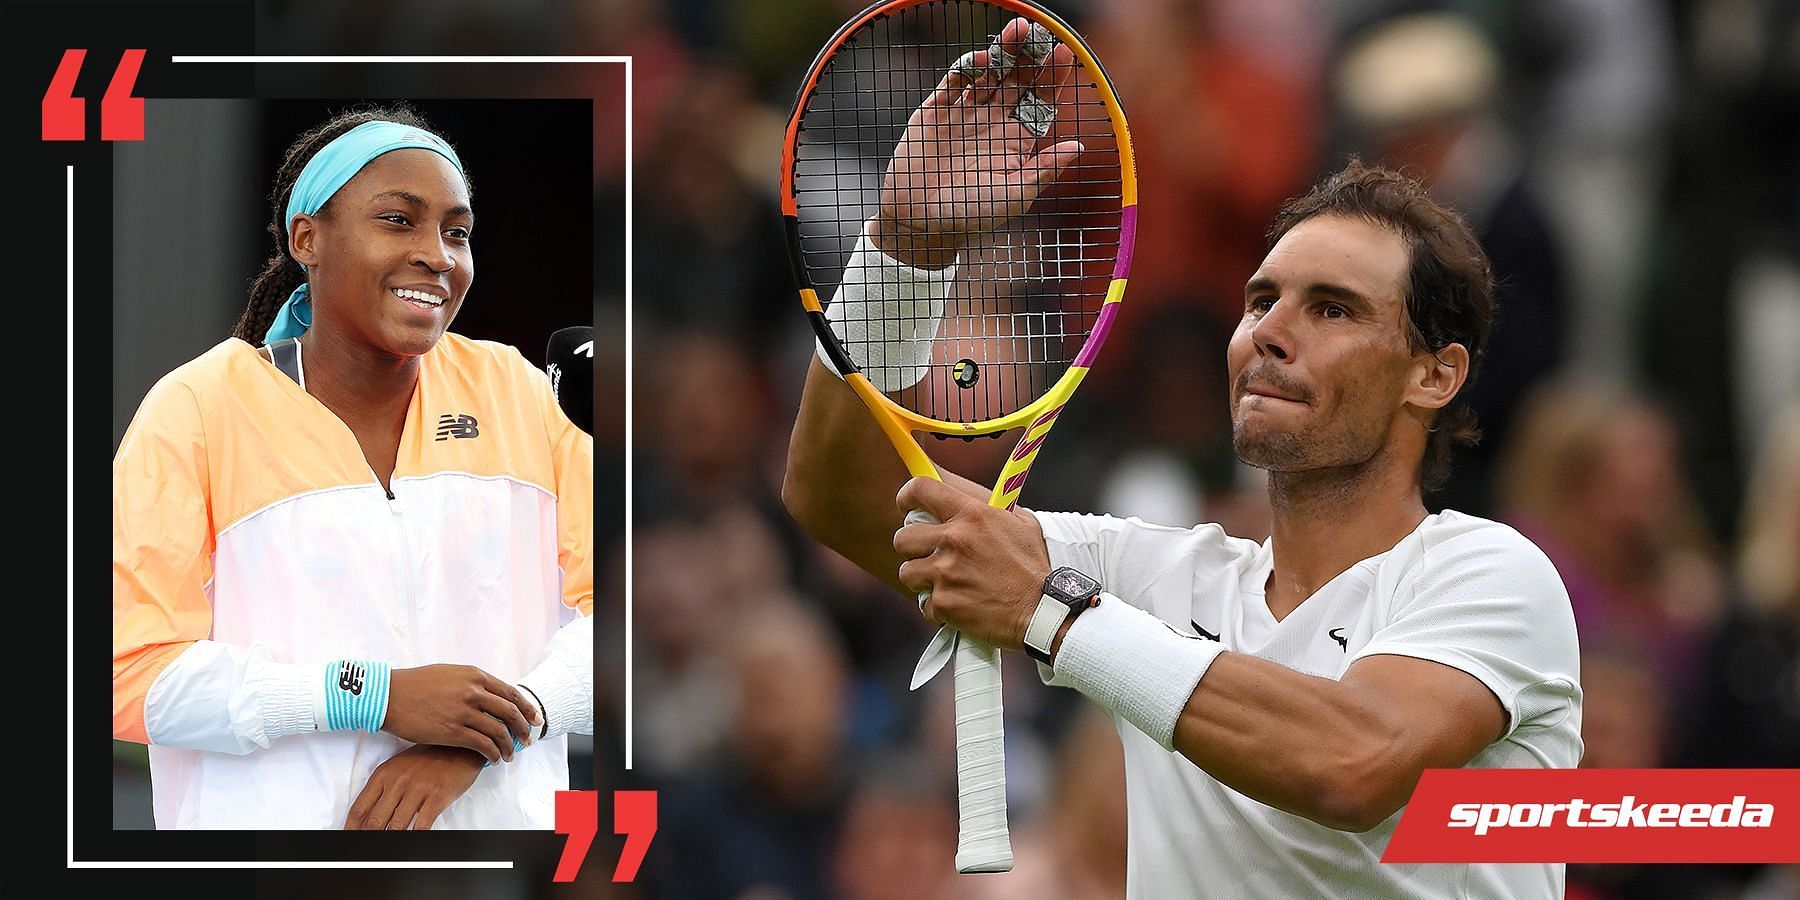 Coco Gauff has thanked Rafael Nadal for his words of praise